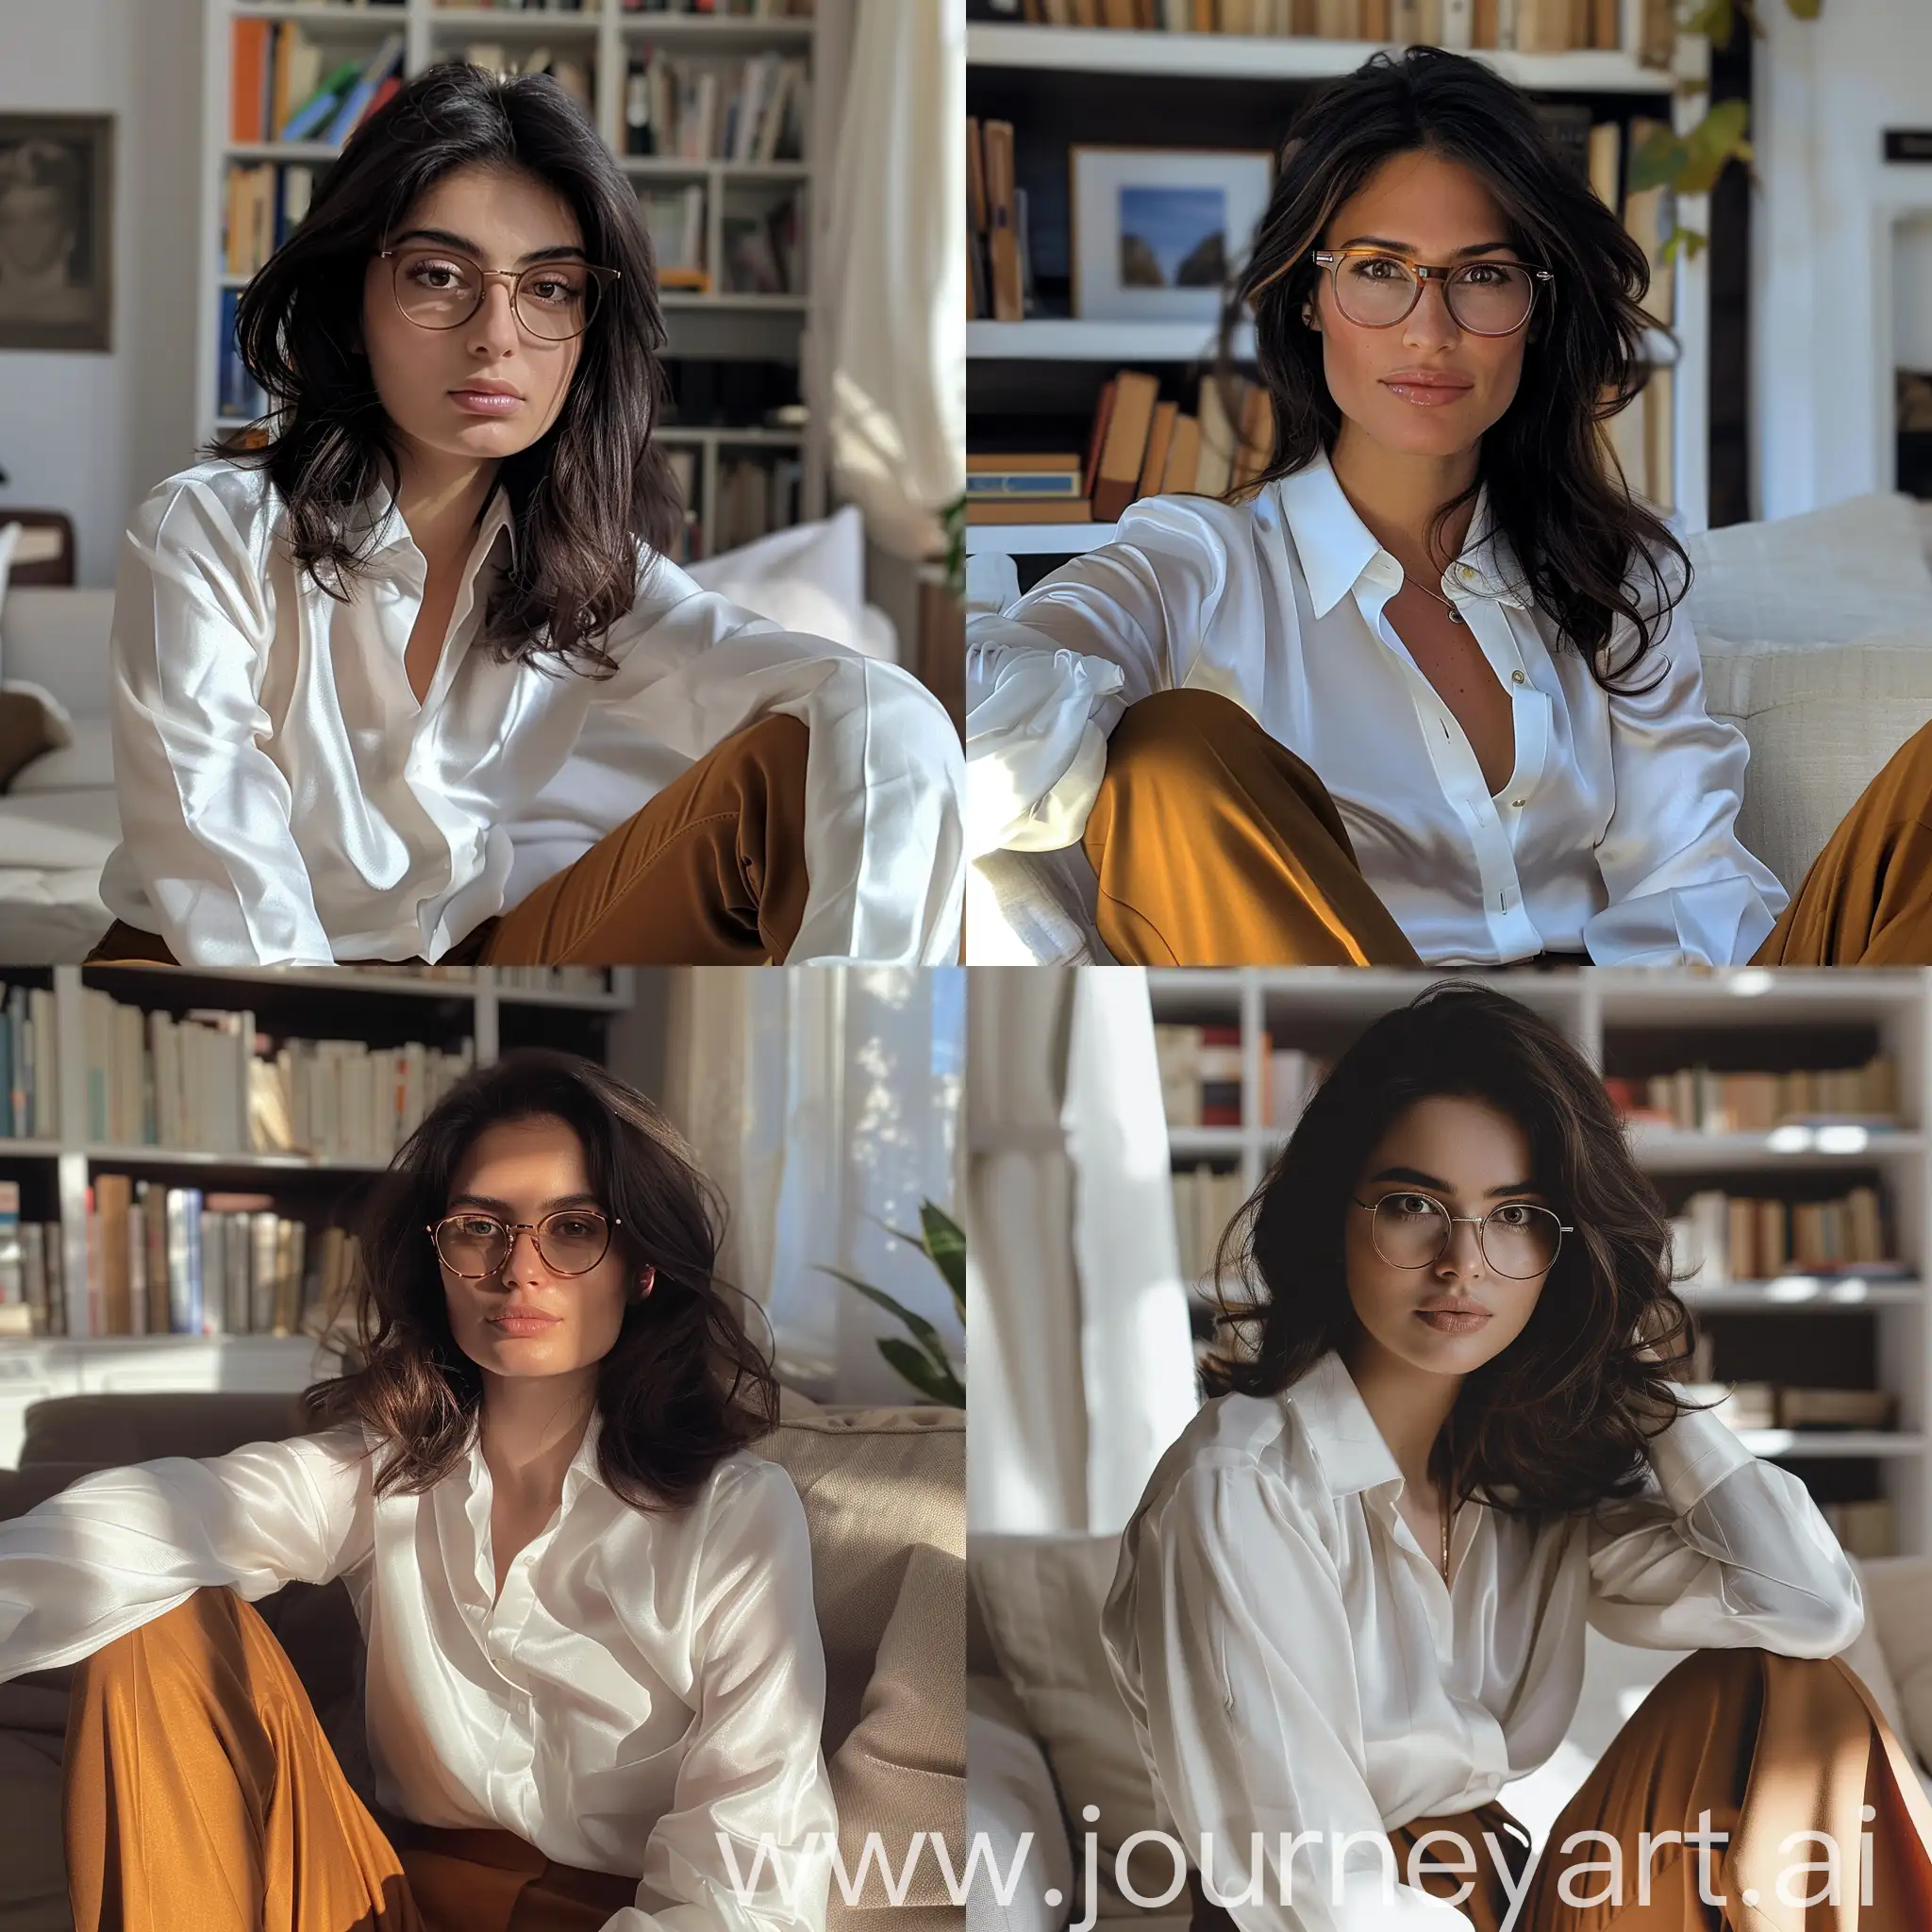 Photo of a 35 year old woman, thin, very thin, dark brown hair, full, serene look, thoughtful, slight smile, natural photo, sitting on the sofa, Photo of a distracted woman, not looking directly at the camera, wearing glasses, wearing a white shirt silk and caramel-colored tailored pants, taken with a Samsung A30 cell phone, Make sure the background is well defined in the image, daylight, bright environment with a shelf of books in the background,